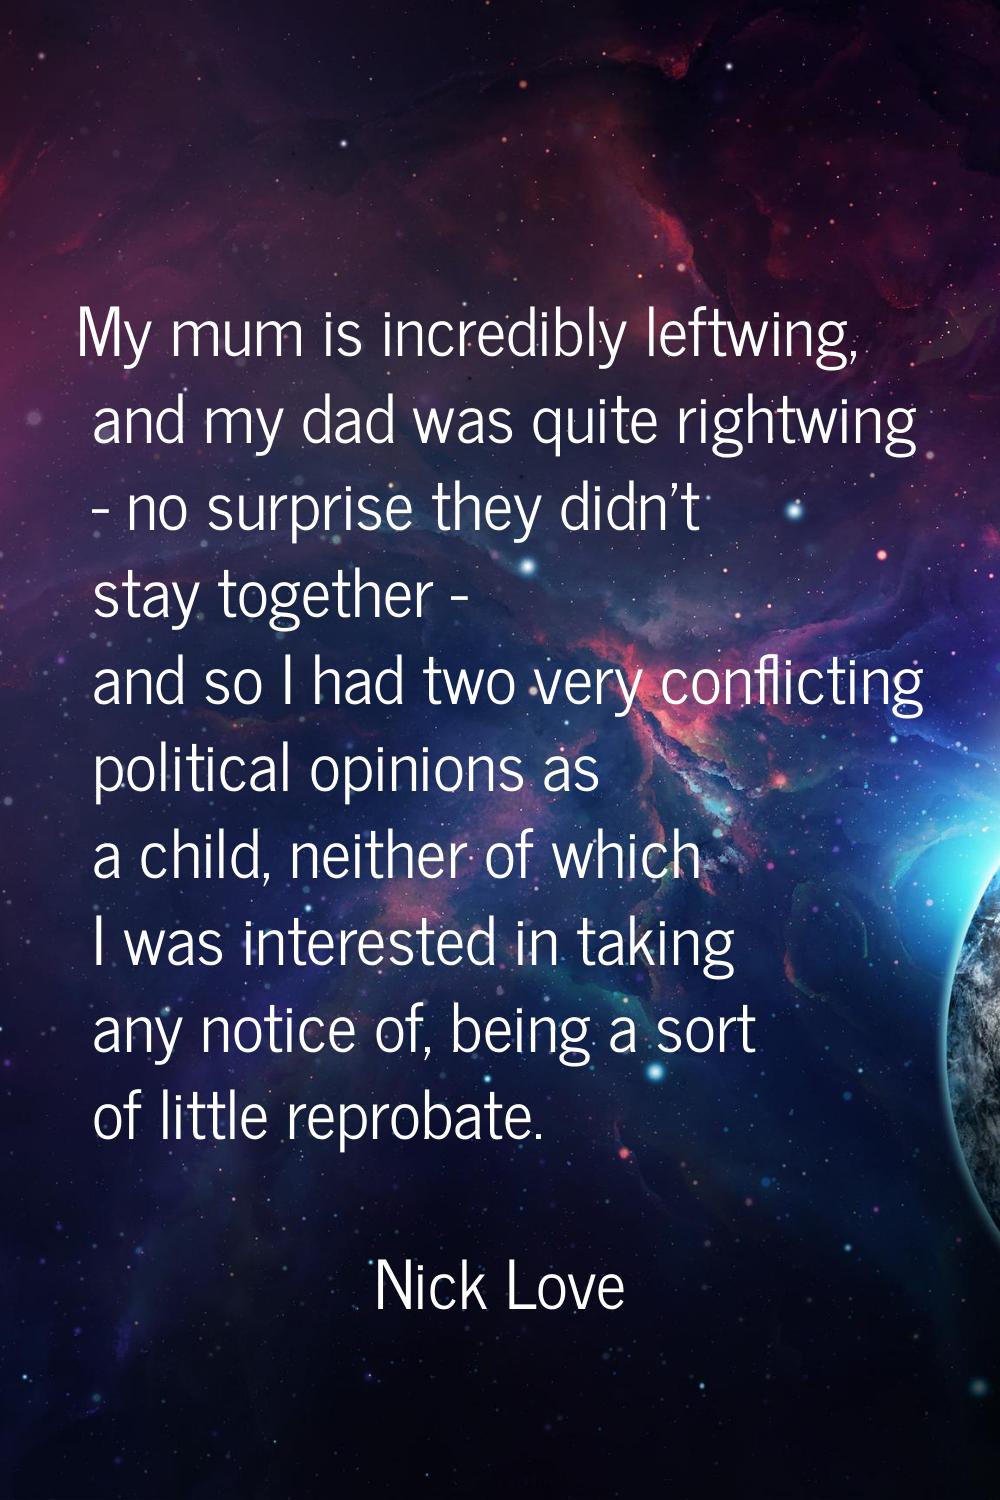 My mum is incredibly leftwing, and my dad was quite rightwing - no surprise they didn't stay togeth